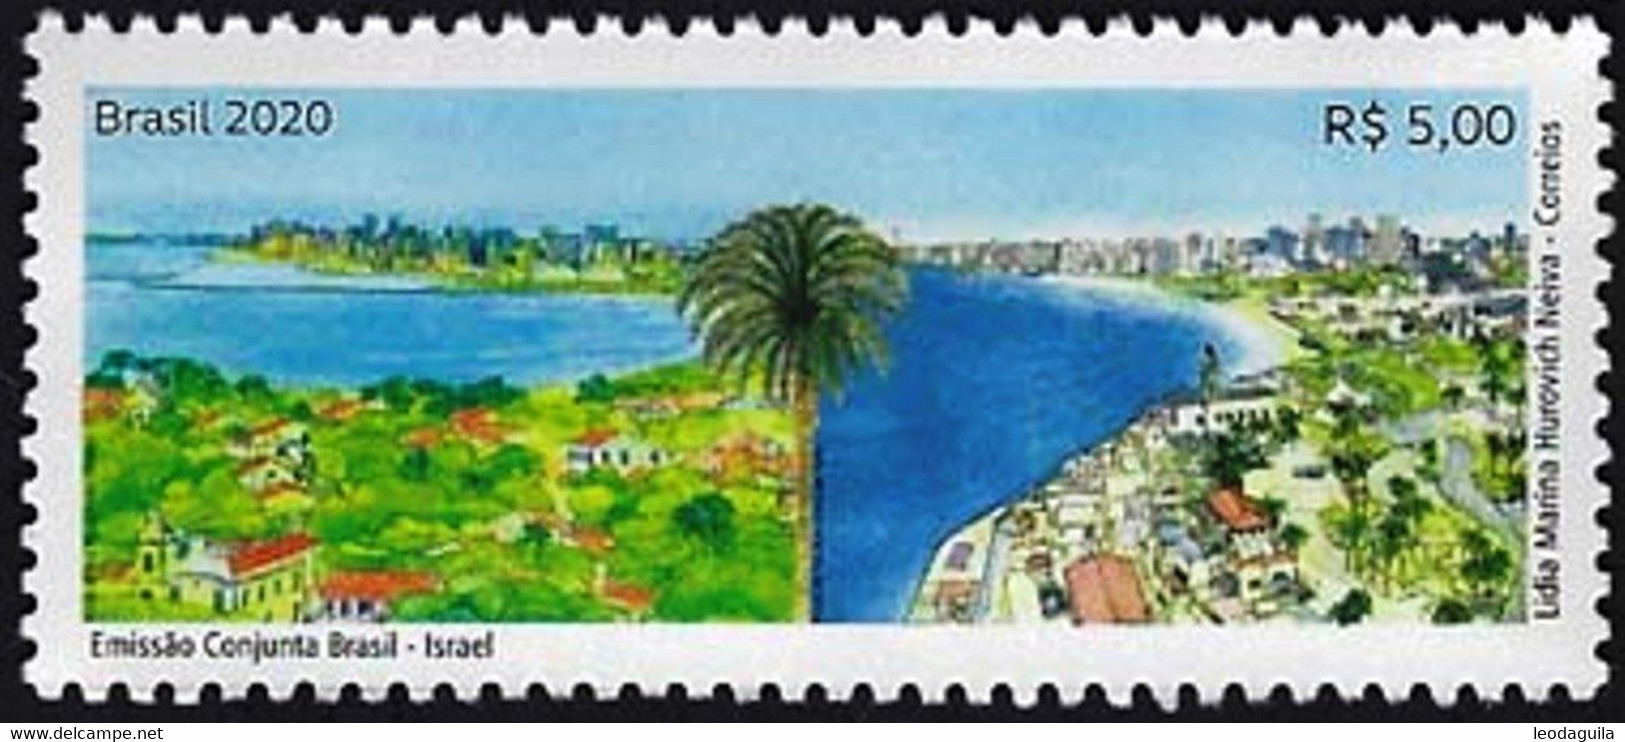 BRAZIL 2020  - ISRAEL And BRAZIL LANDSCAPE - JOINT ISSUE  - MNH - Neufs